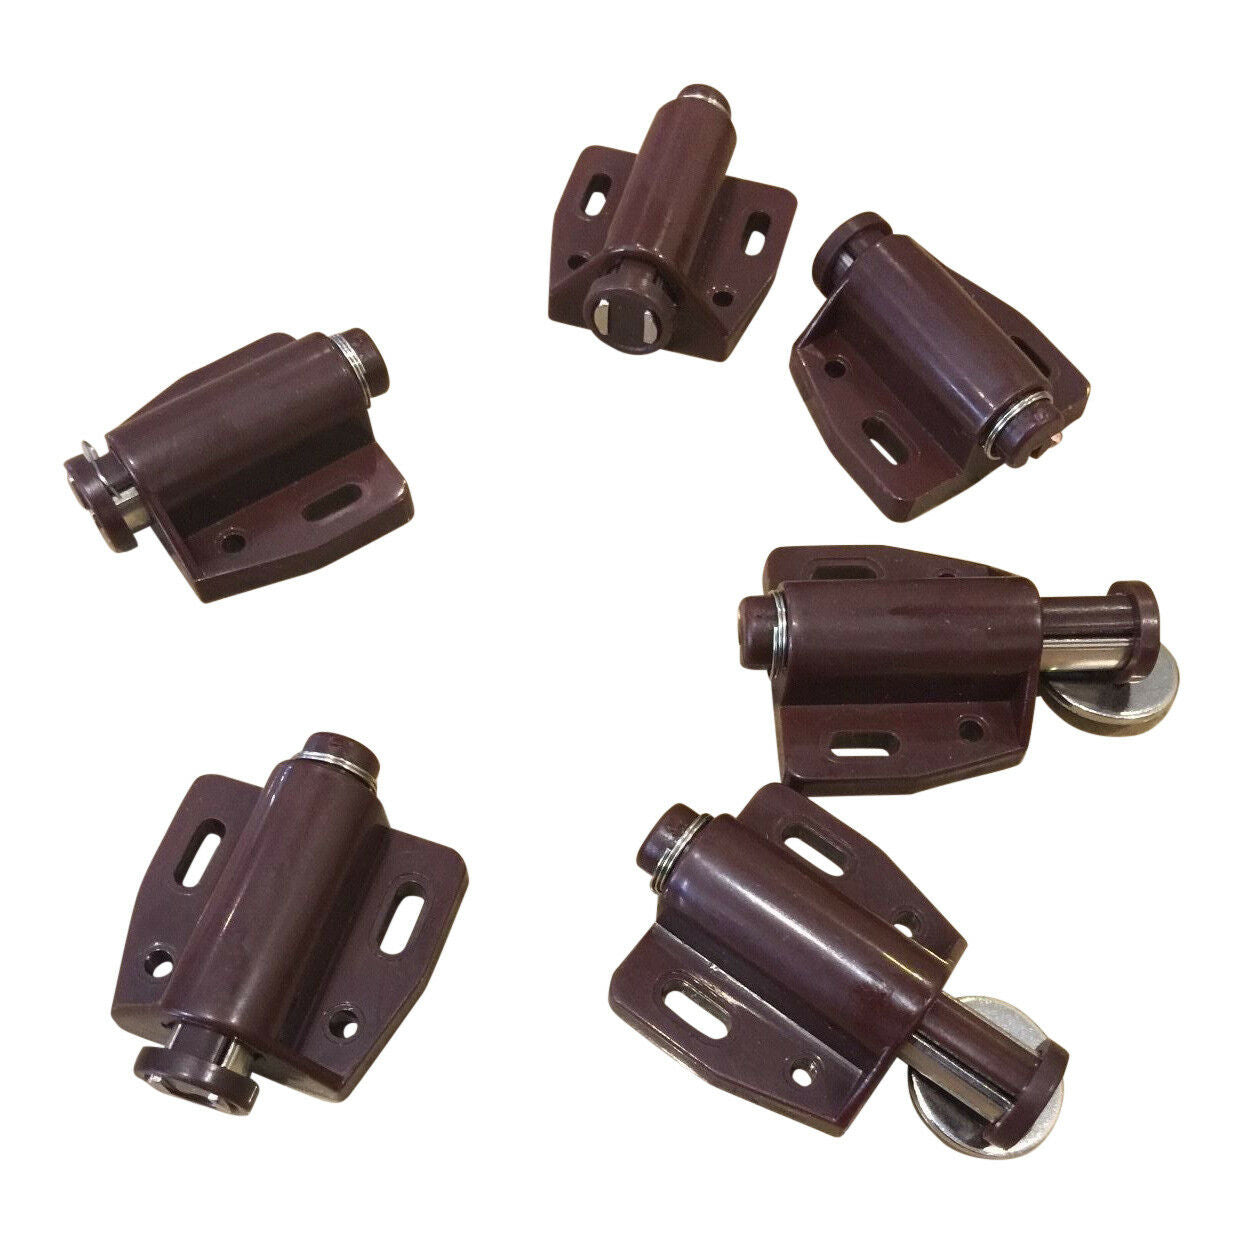 3 pcs New Brown Magnet Single Touch Latch Brown - Same Day free ship US seller 8.99 freeshipping - Kool Products